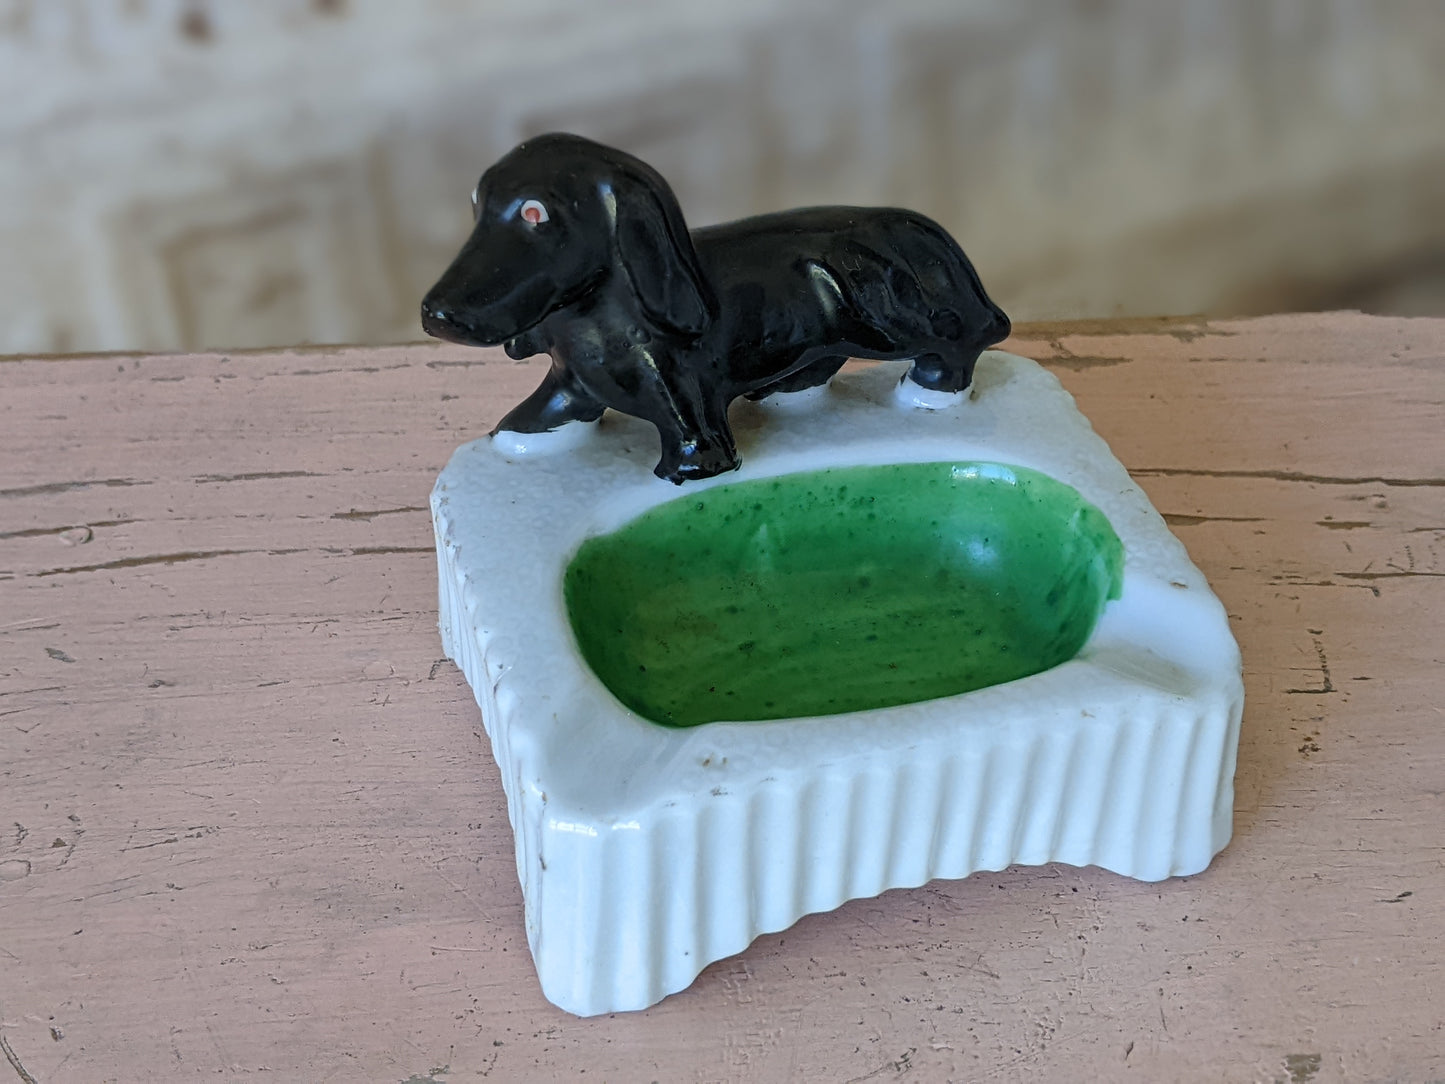 1950s Dachshund Charming Ashtray !! Rare !! Hand-Painted Porcelain Japan !! Awesome Unusual Gifts !! Retro Style Gift Ideas !!